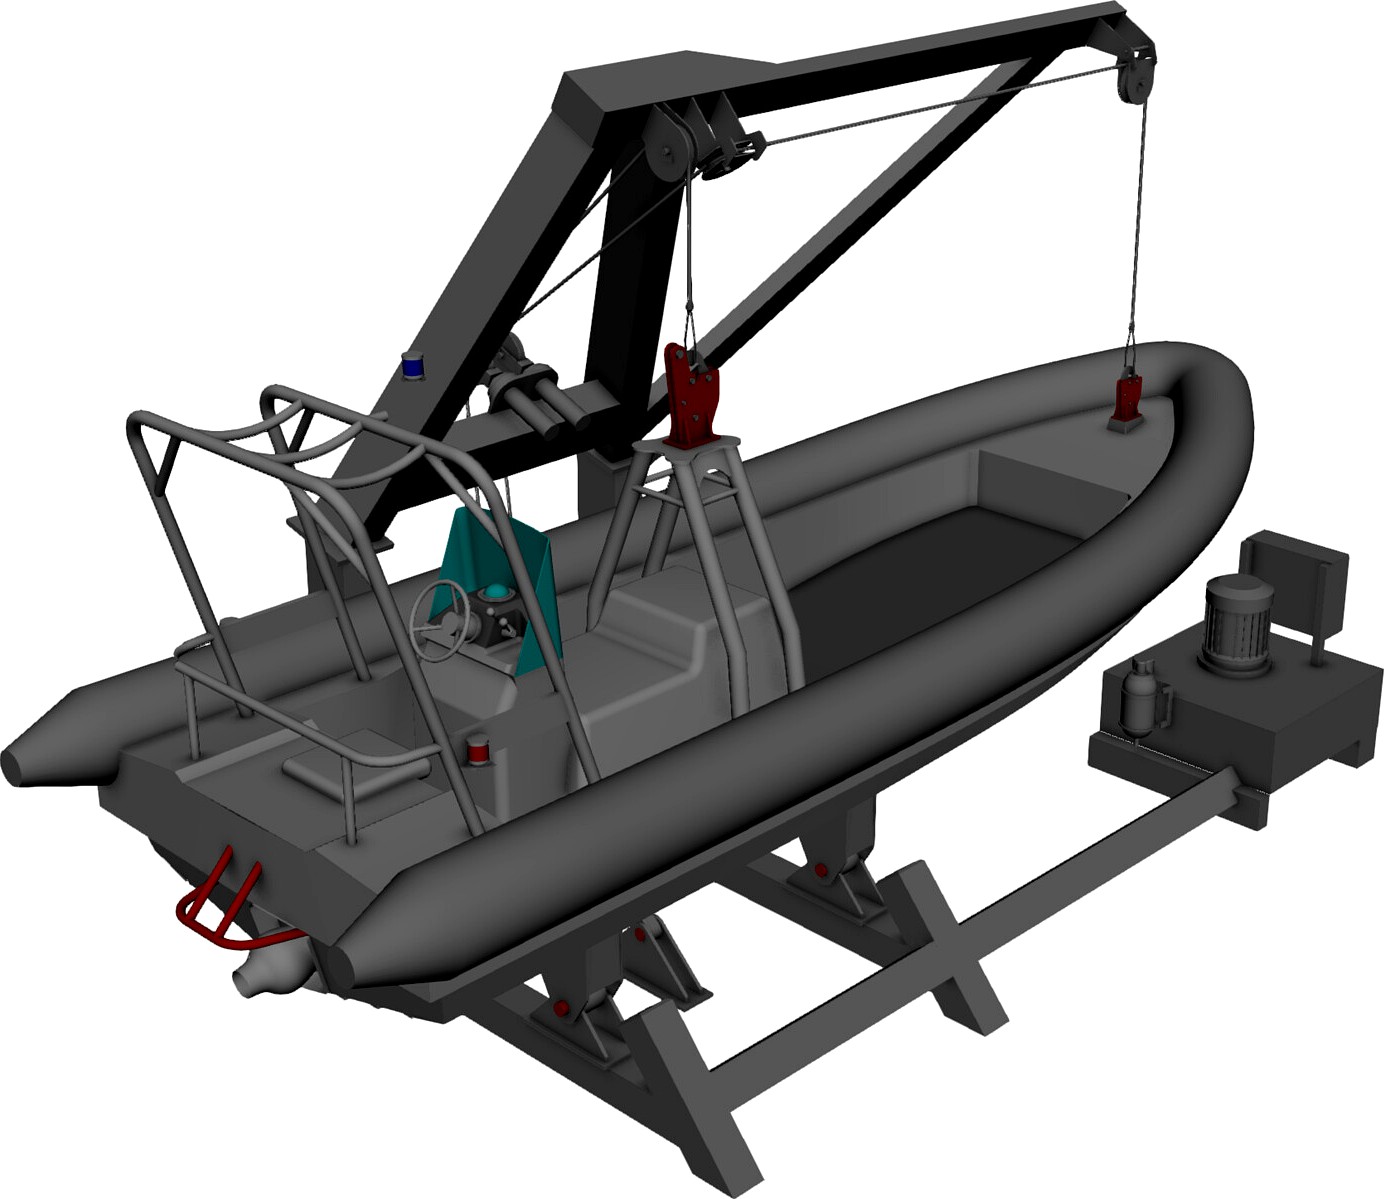 Davit and Inflatable Boat 3D CAD Model